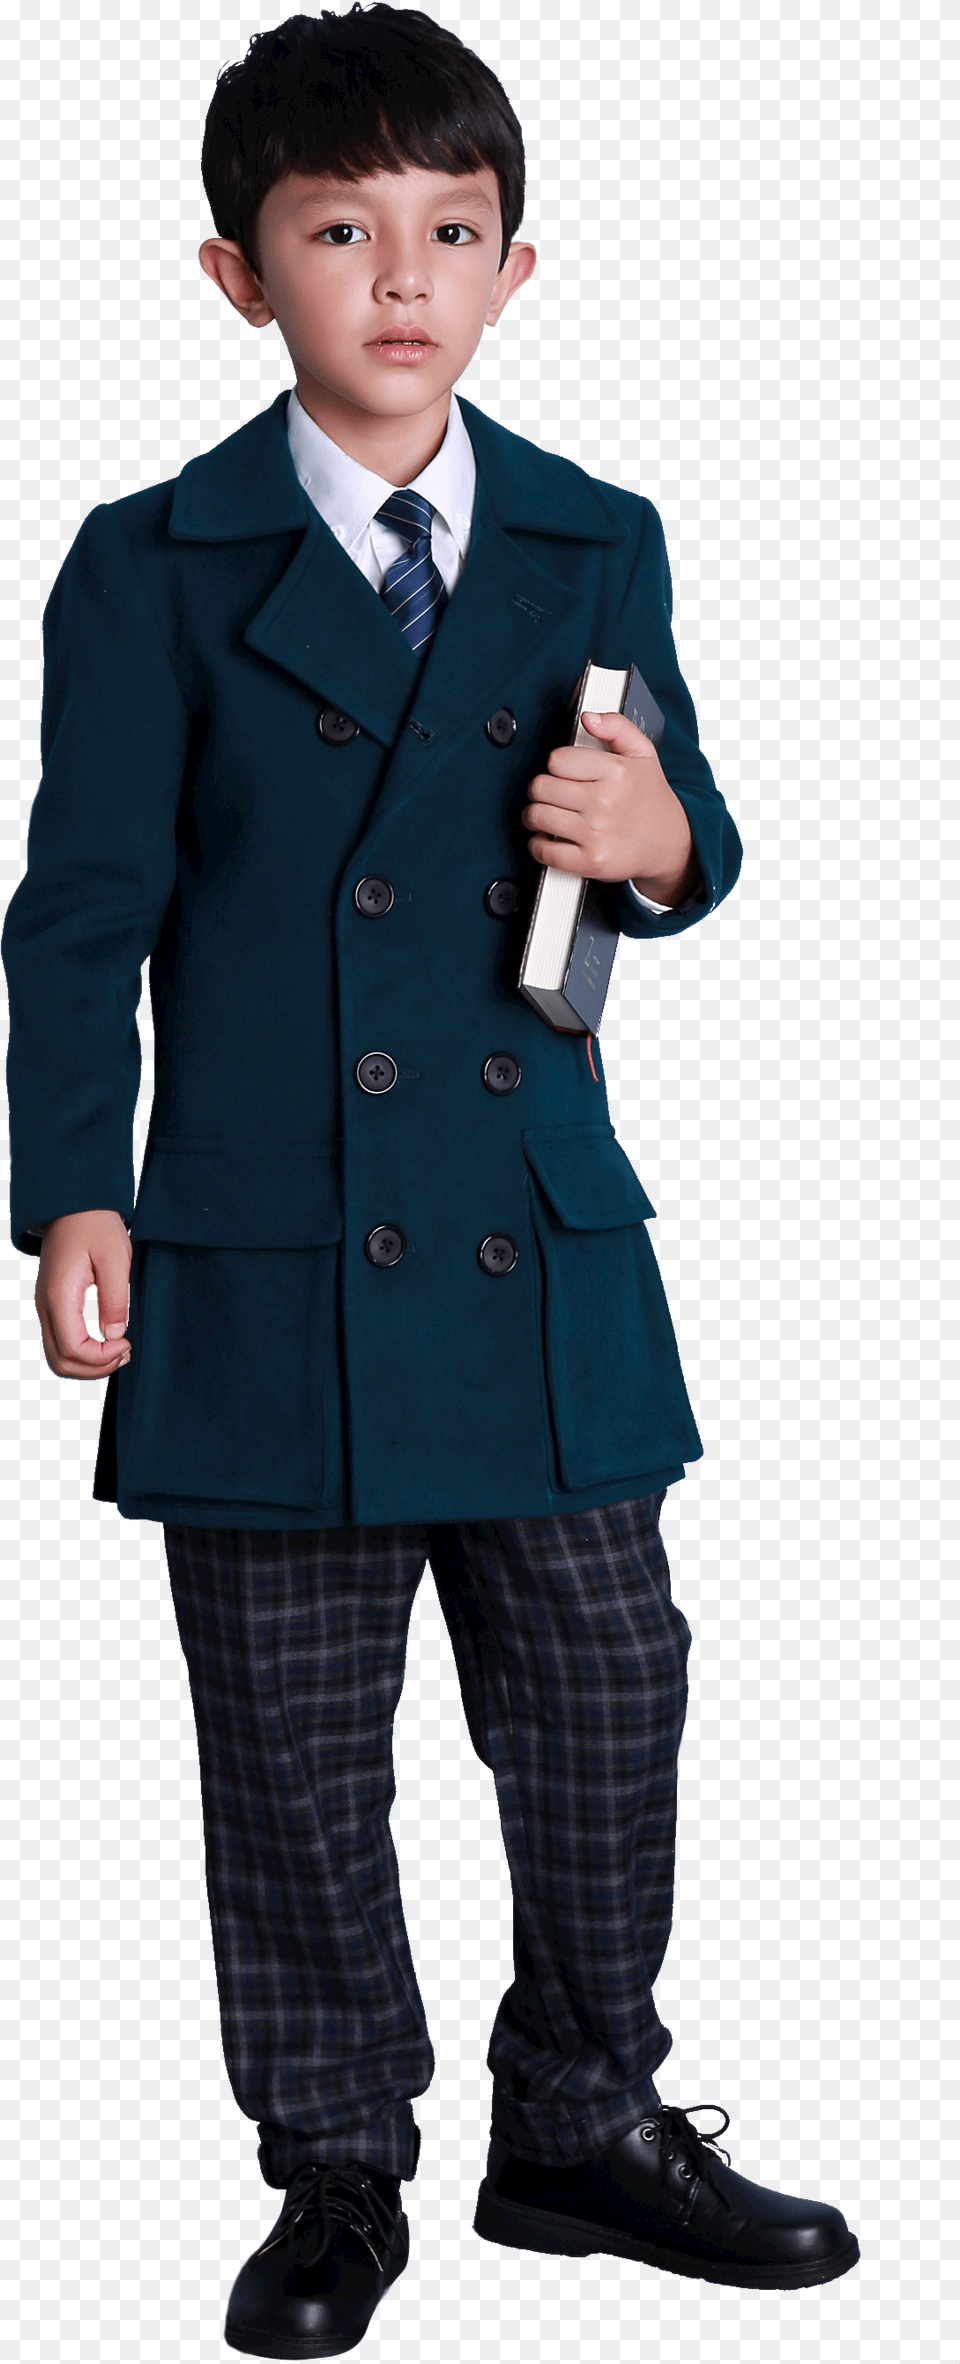 Double Breasted School Uniform, Formal Wear, Clothing, Coat, Suit Png